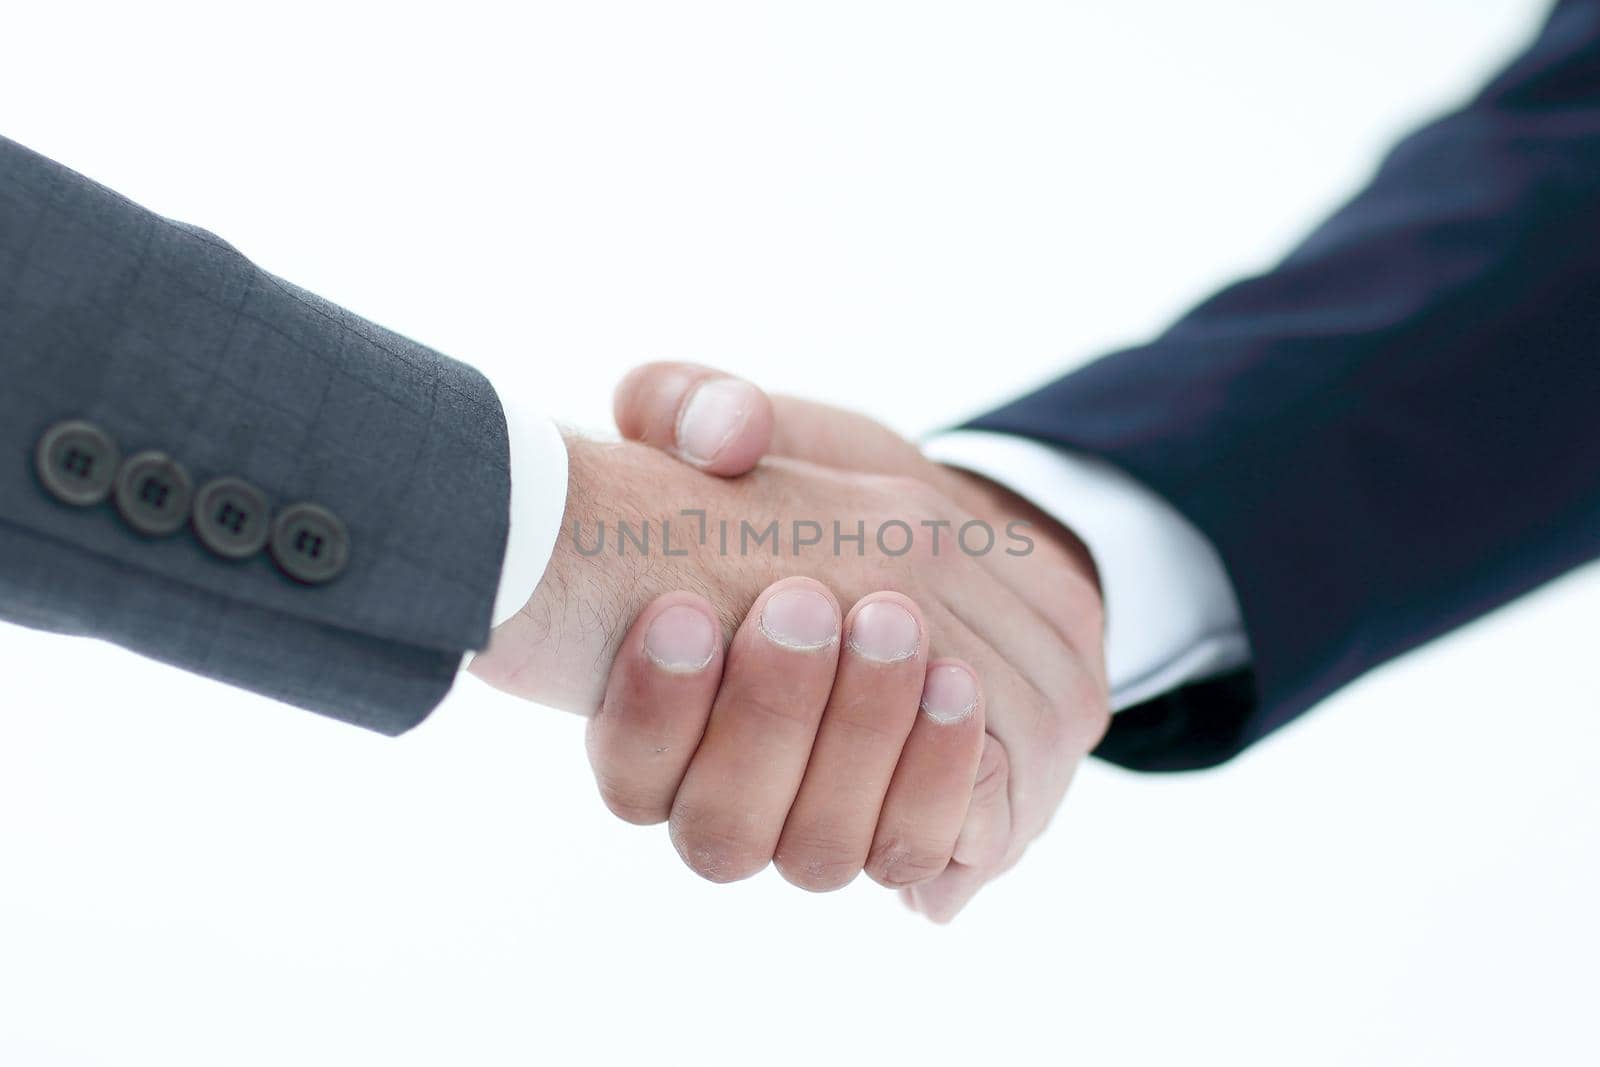 Business handshake - closing a deal on a gray background